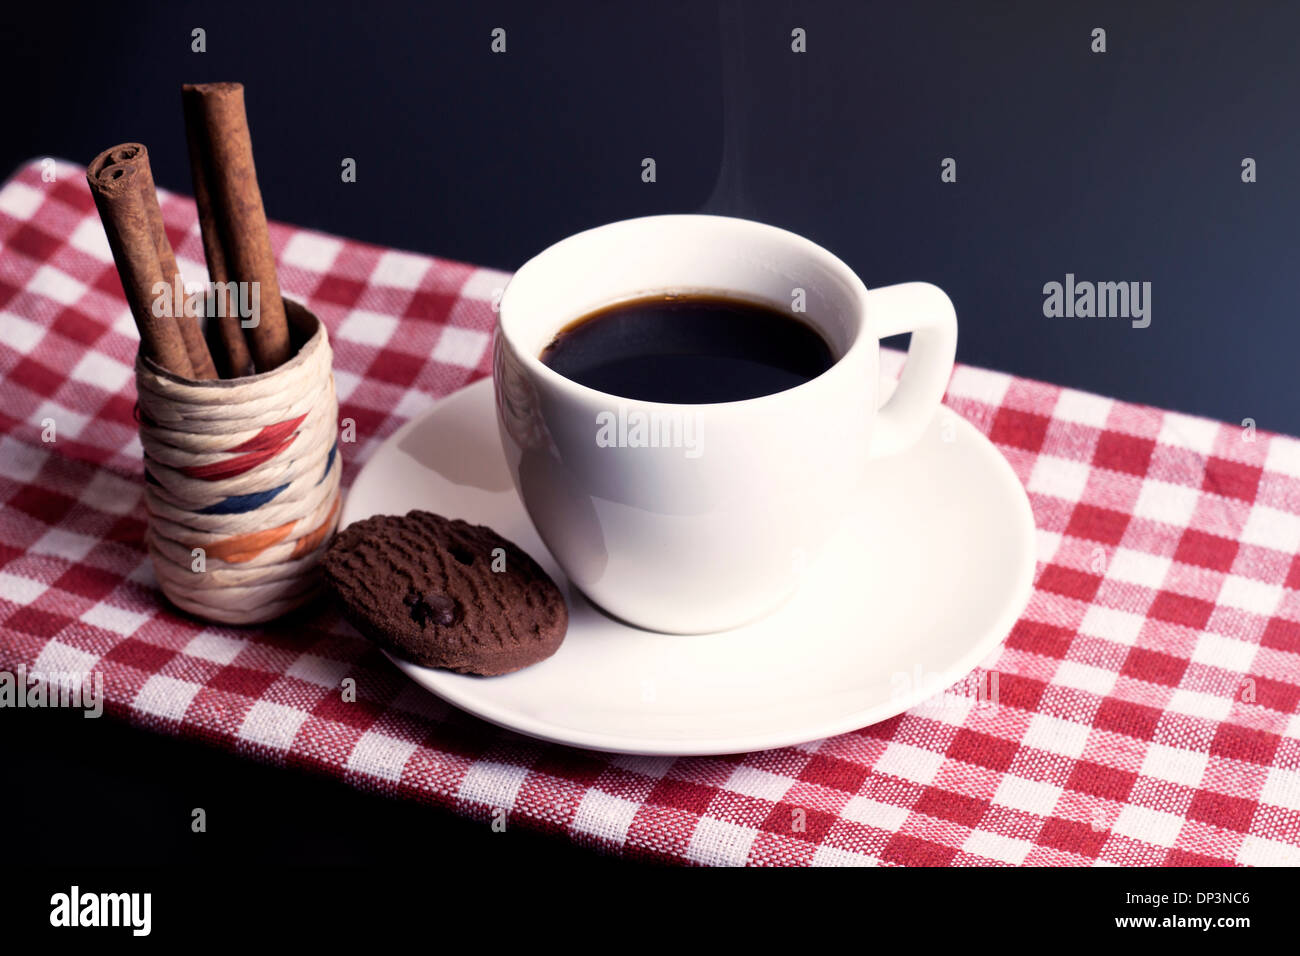 white coffee cup with biscuit on plate Stock Photo